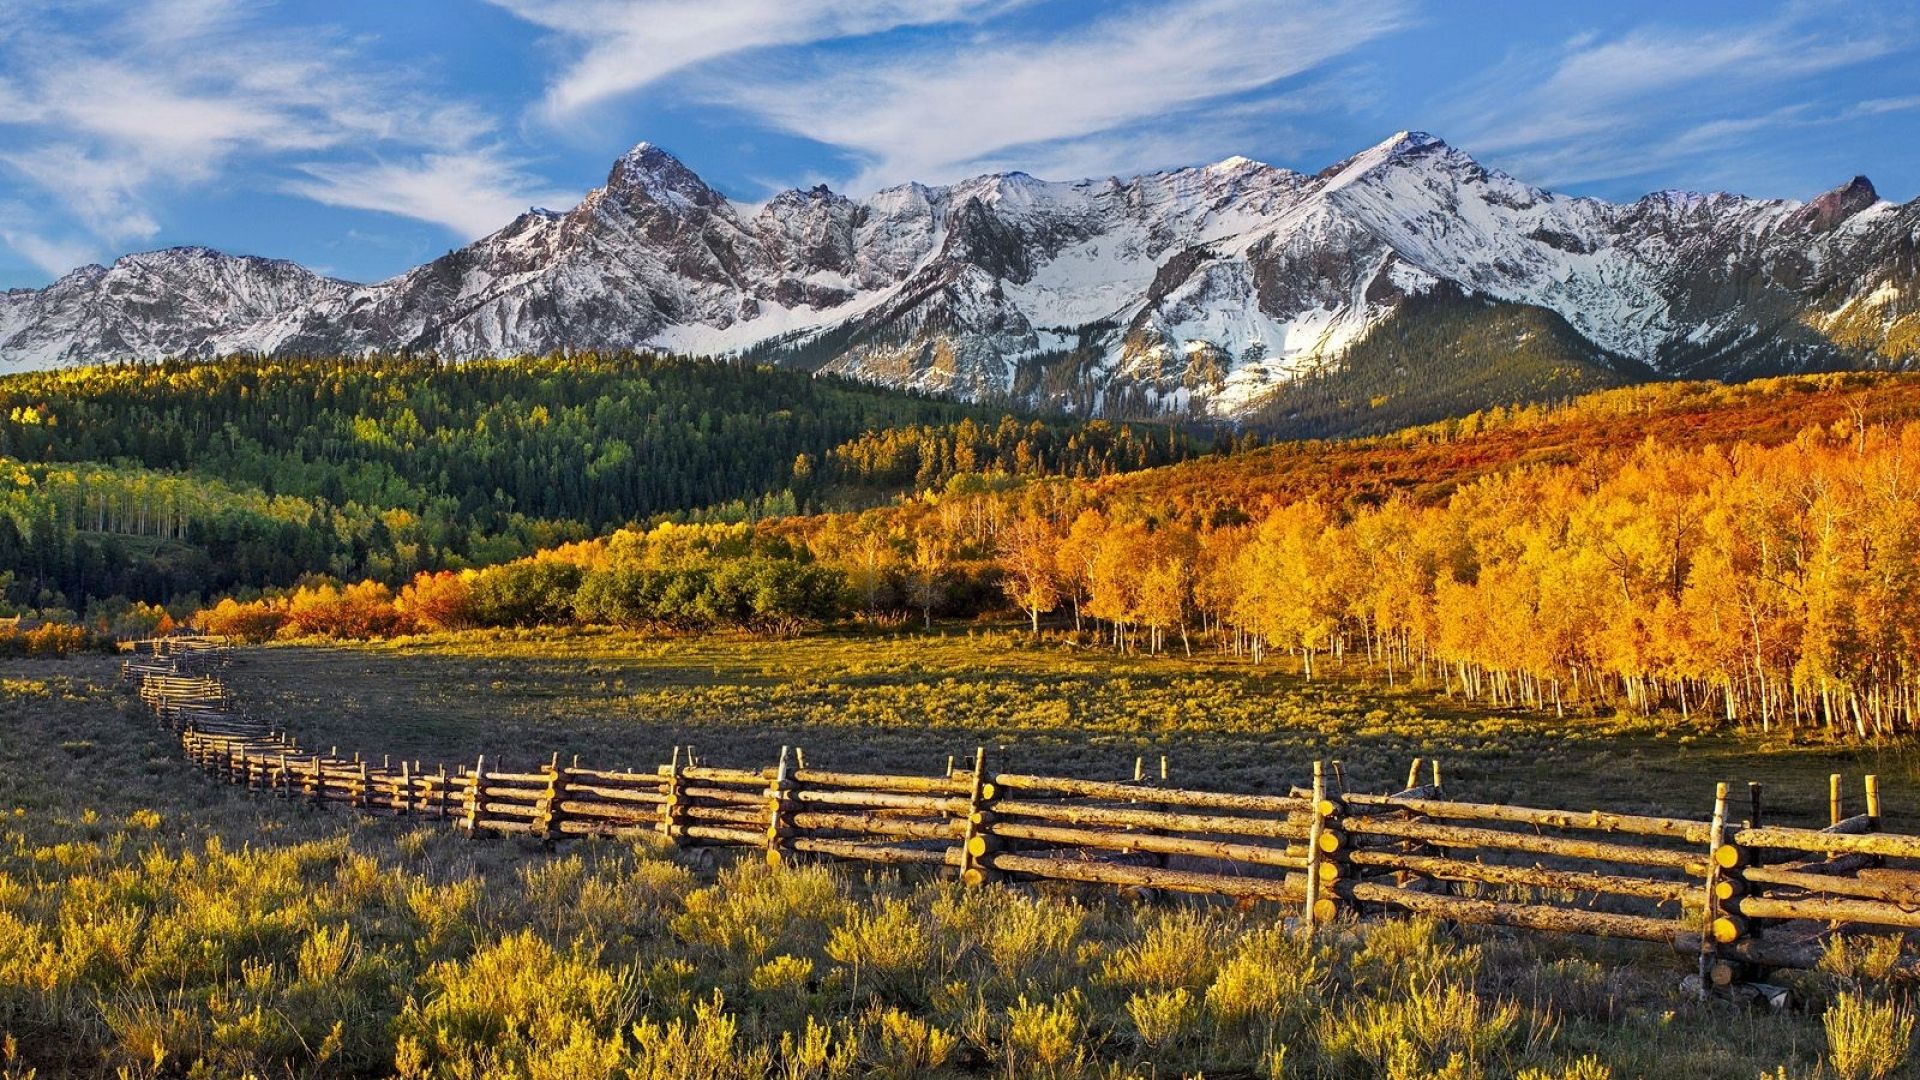 Download Wallpaper 1920x1080 mountains, autumn, fence, logs, pasture, trees Full HD 1080p HD Background